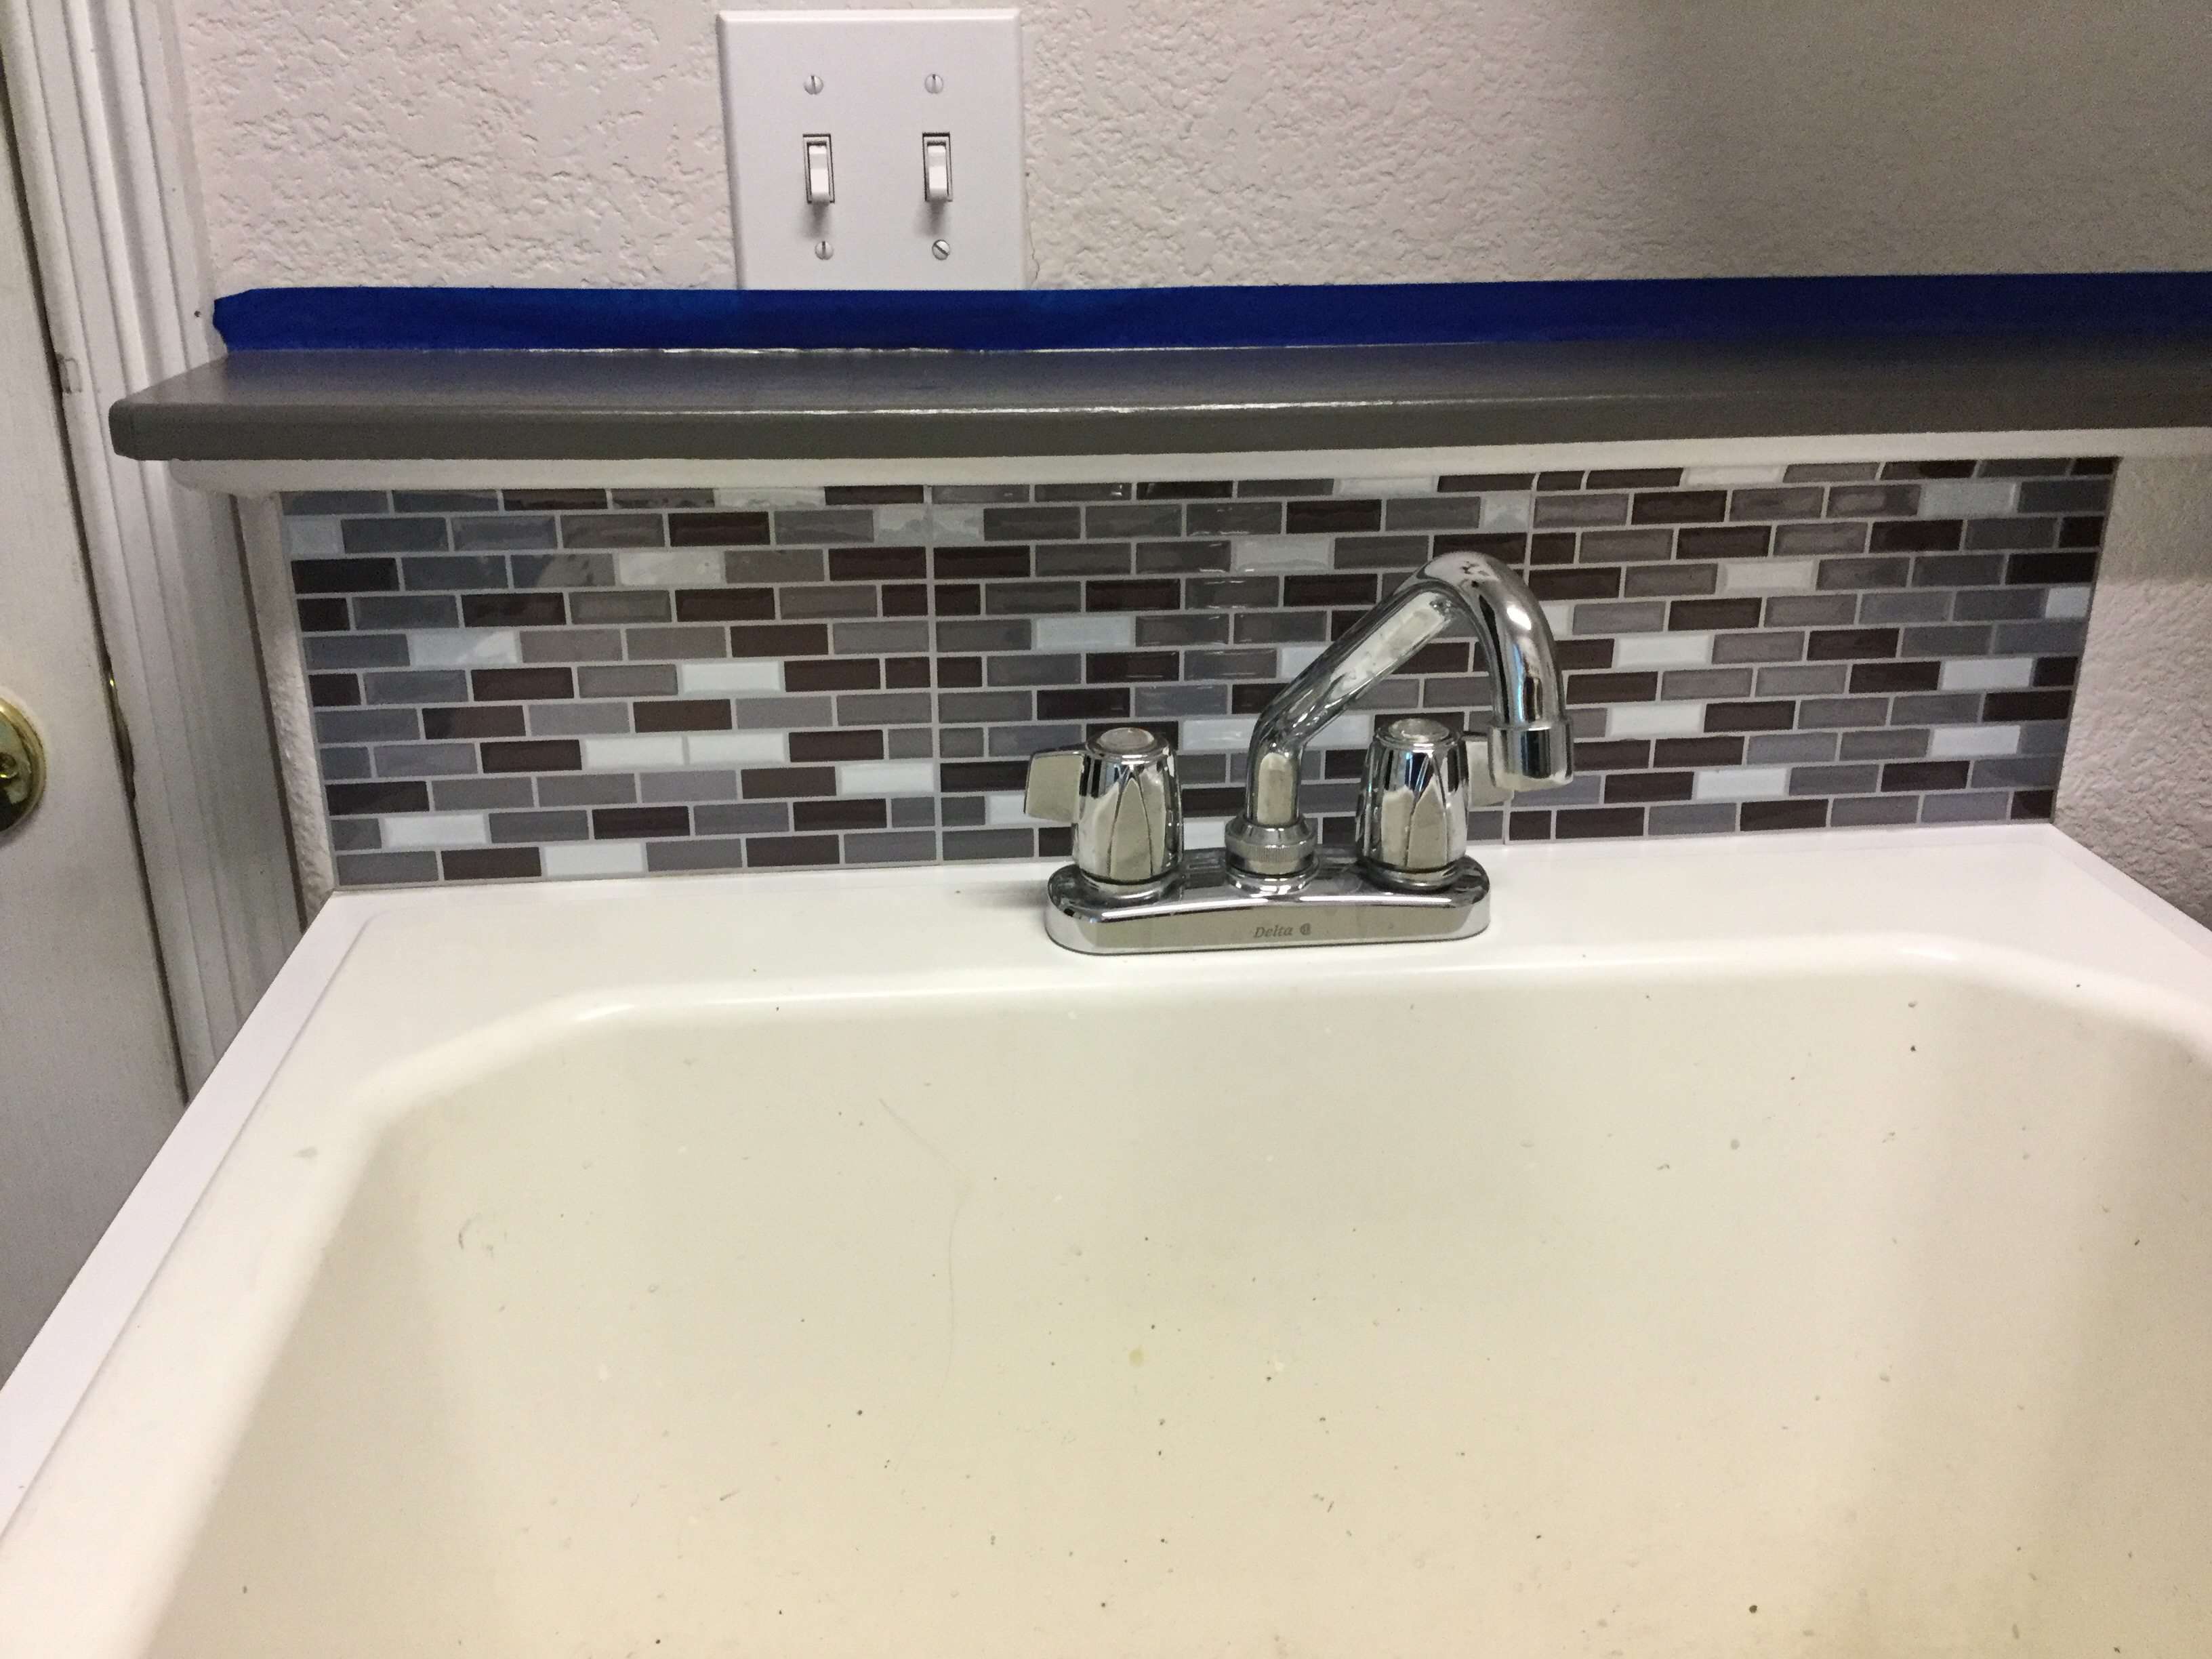 I added a peel and stick back splash to the laundry sink as well.